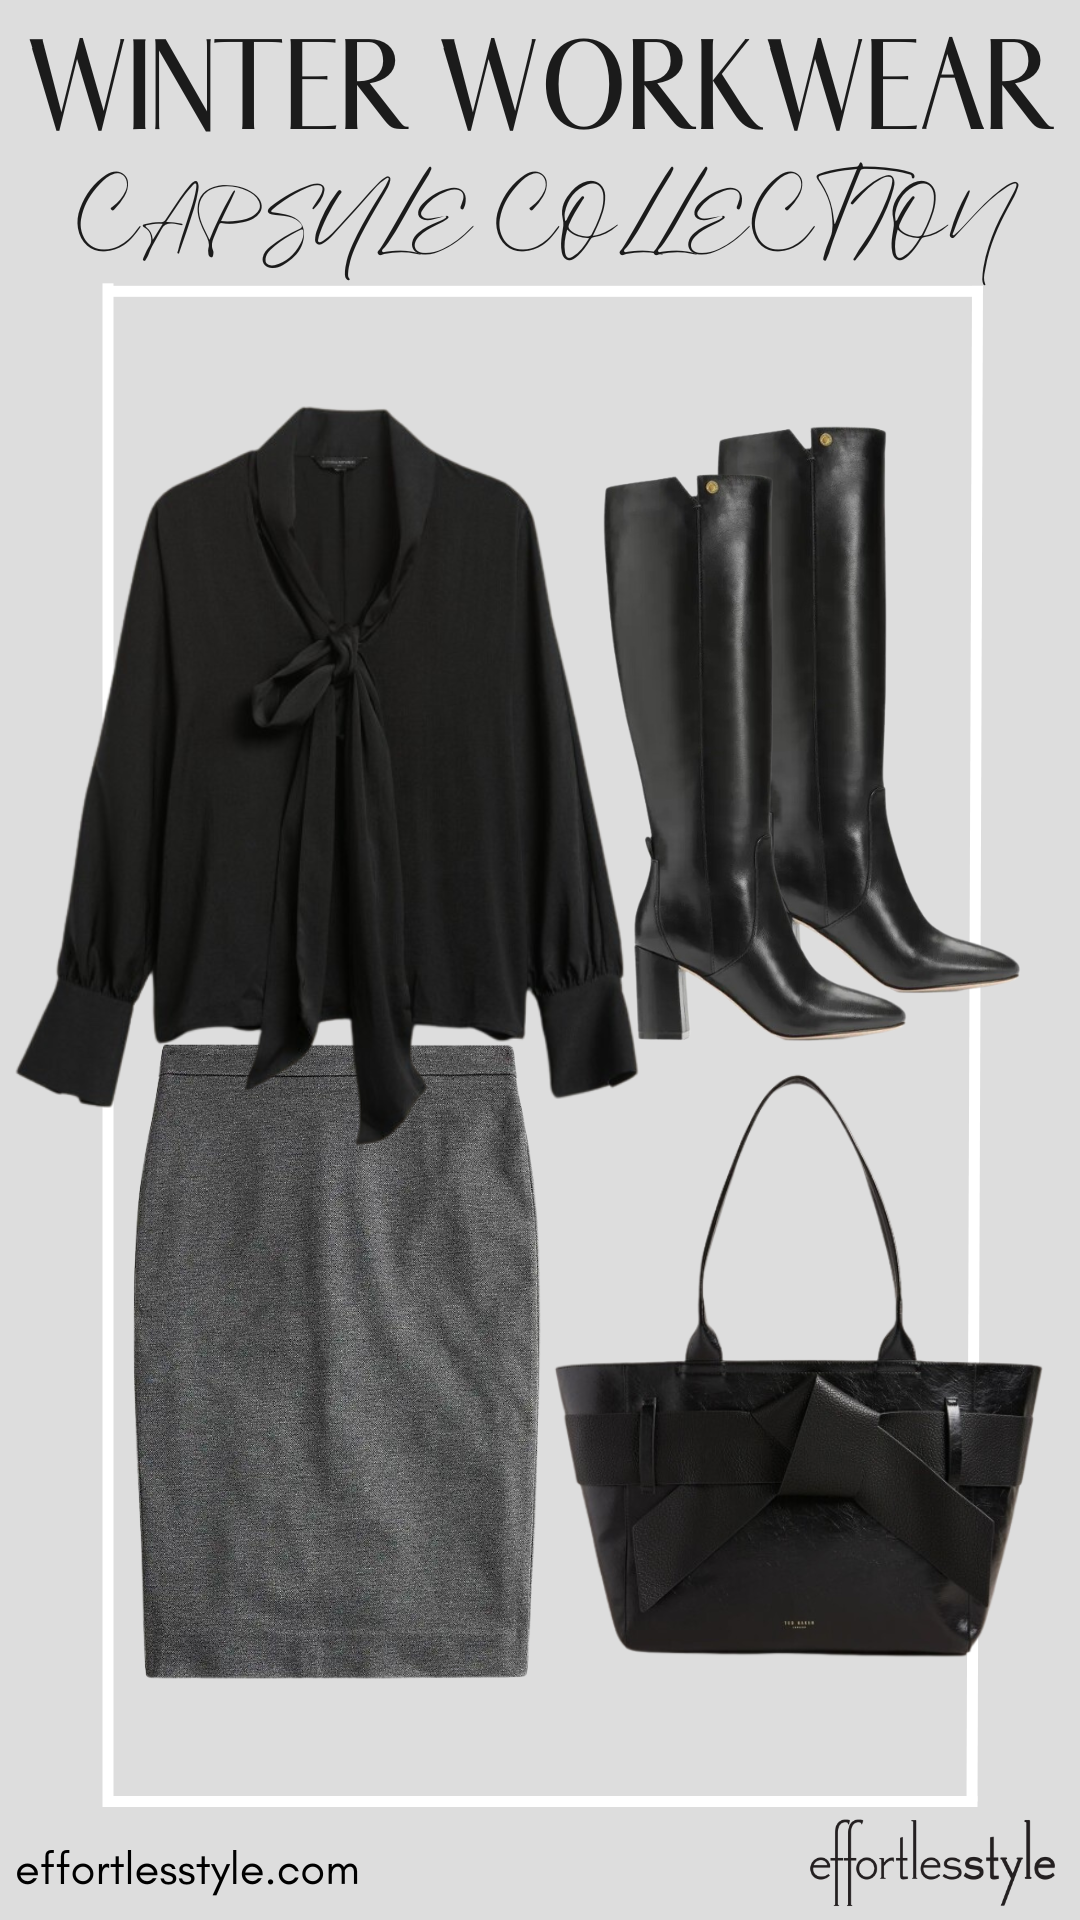 How To Wear Our Winter Workwear Capsule Wardrobe - Part 1 Bow Neck Blouse & Pencil Skirt & Black Boot how to style tall boots how to wear tall boots with a pencil skirt how to make a pencil skirt fun how to style a grey skirt for work